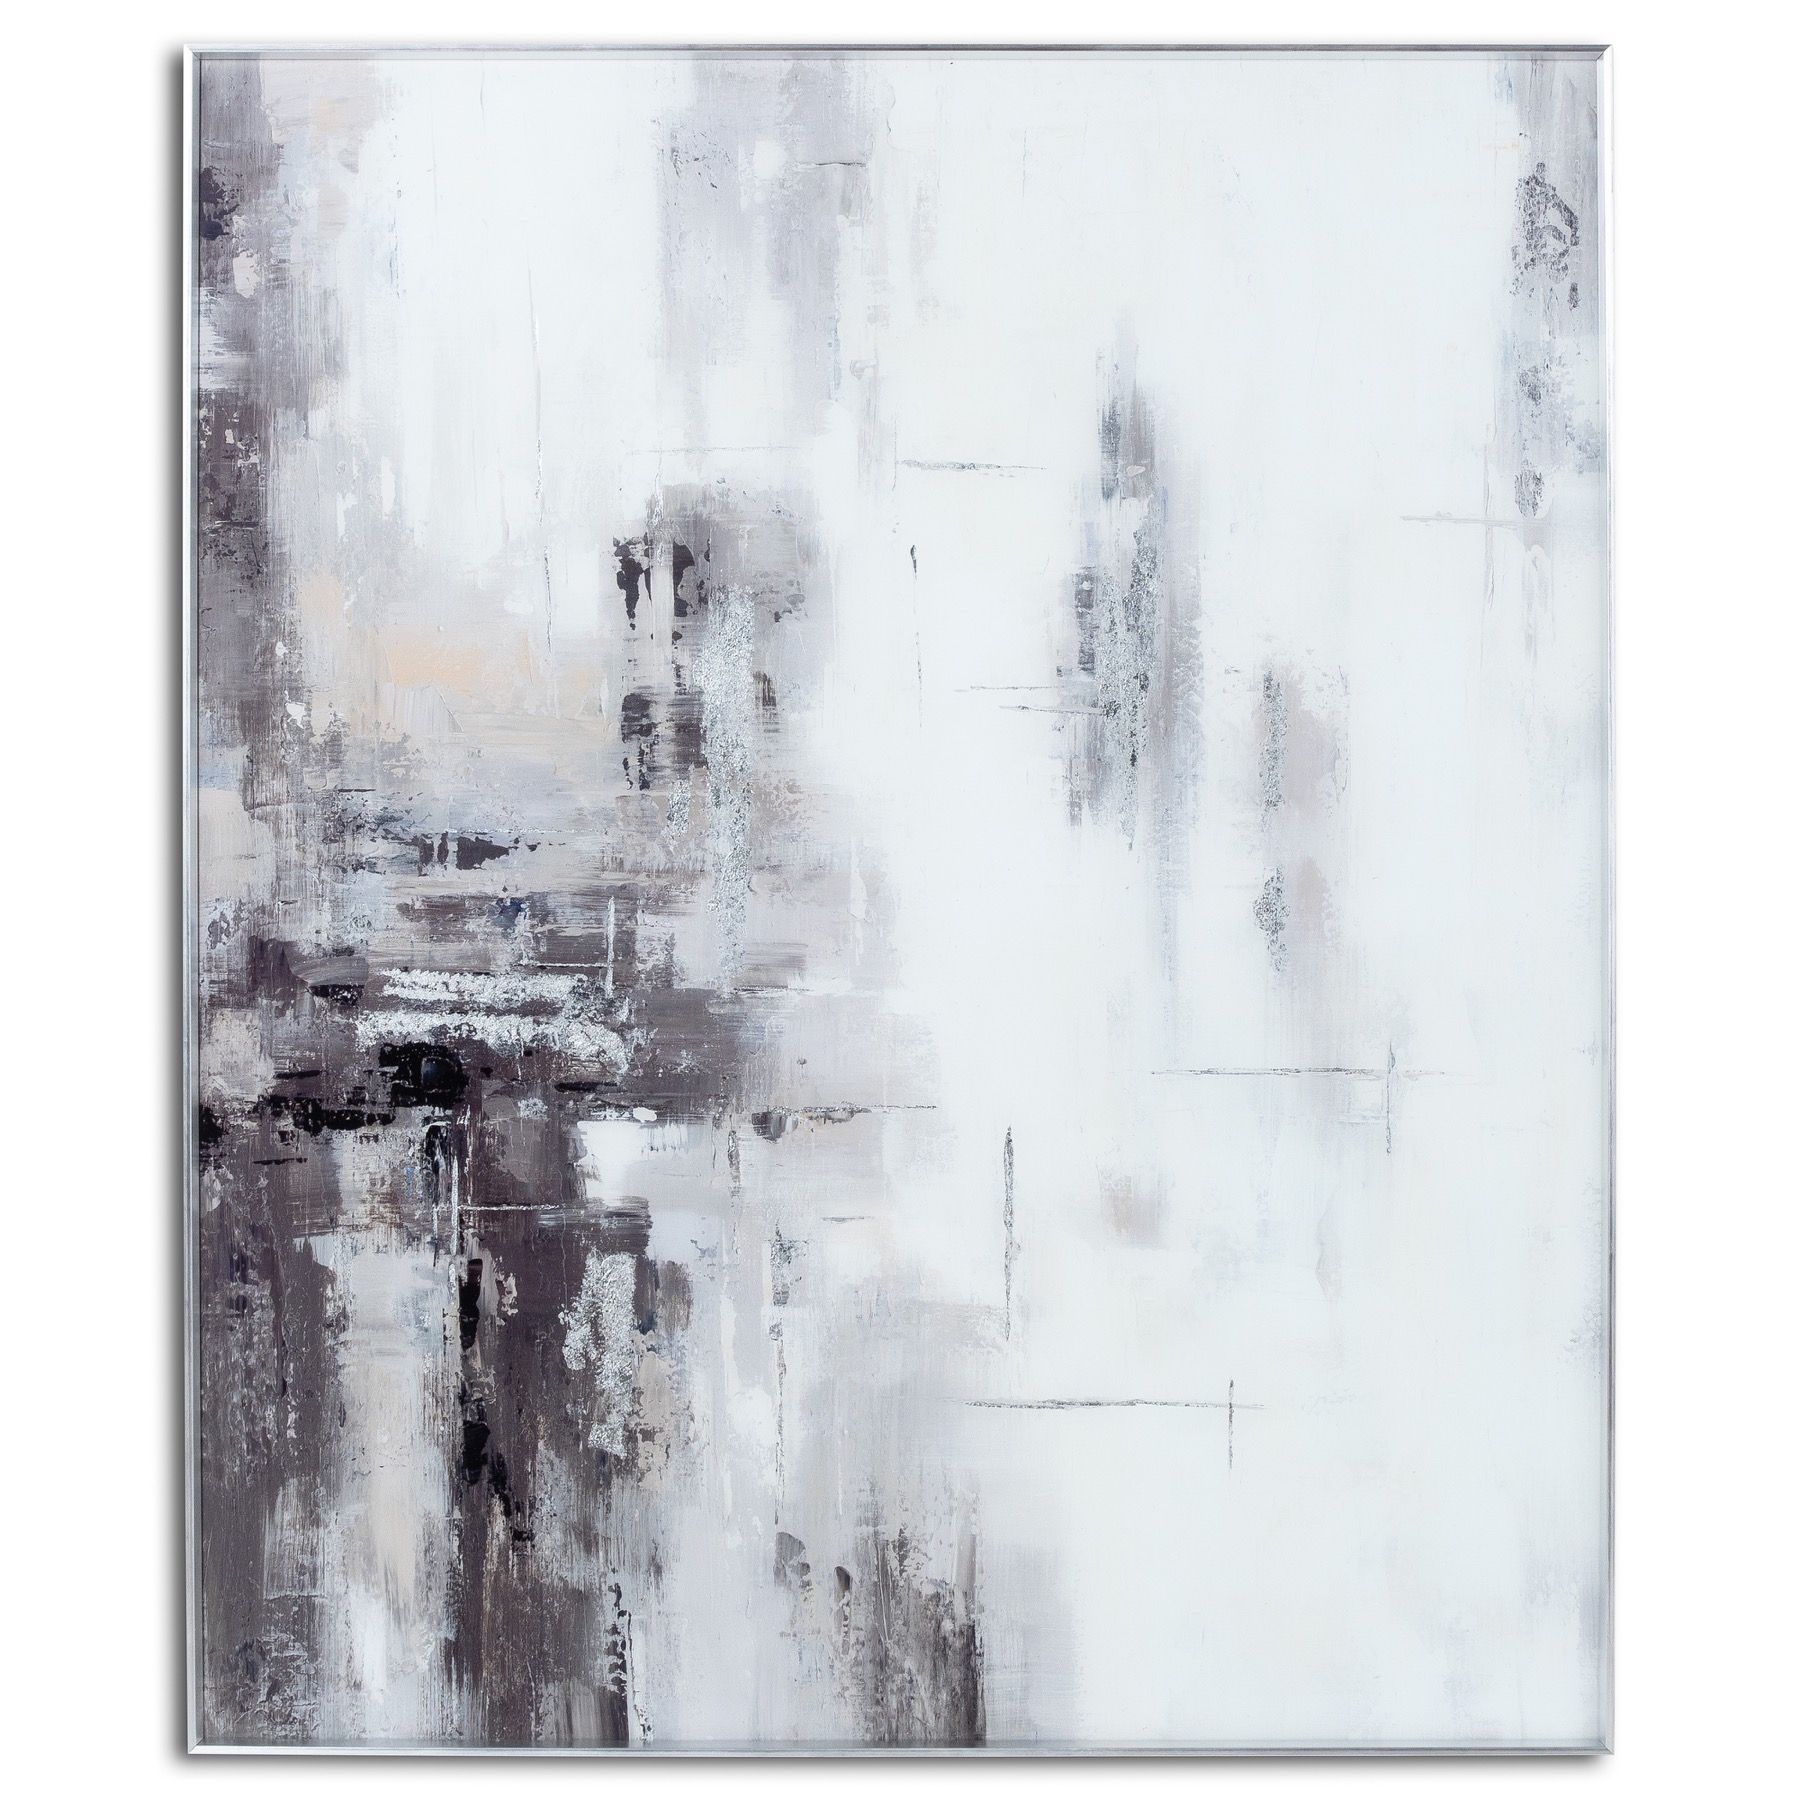 Hand Painted Black And White Soft Abstract Painting - Image 1